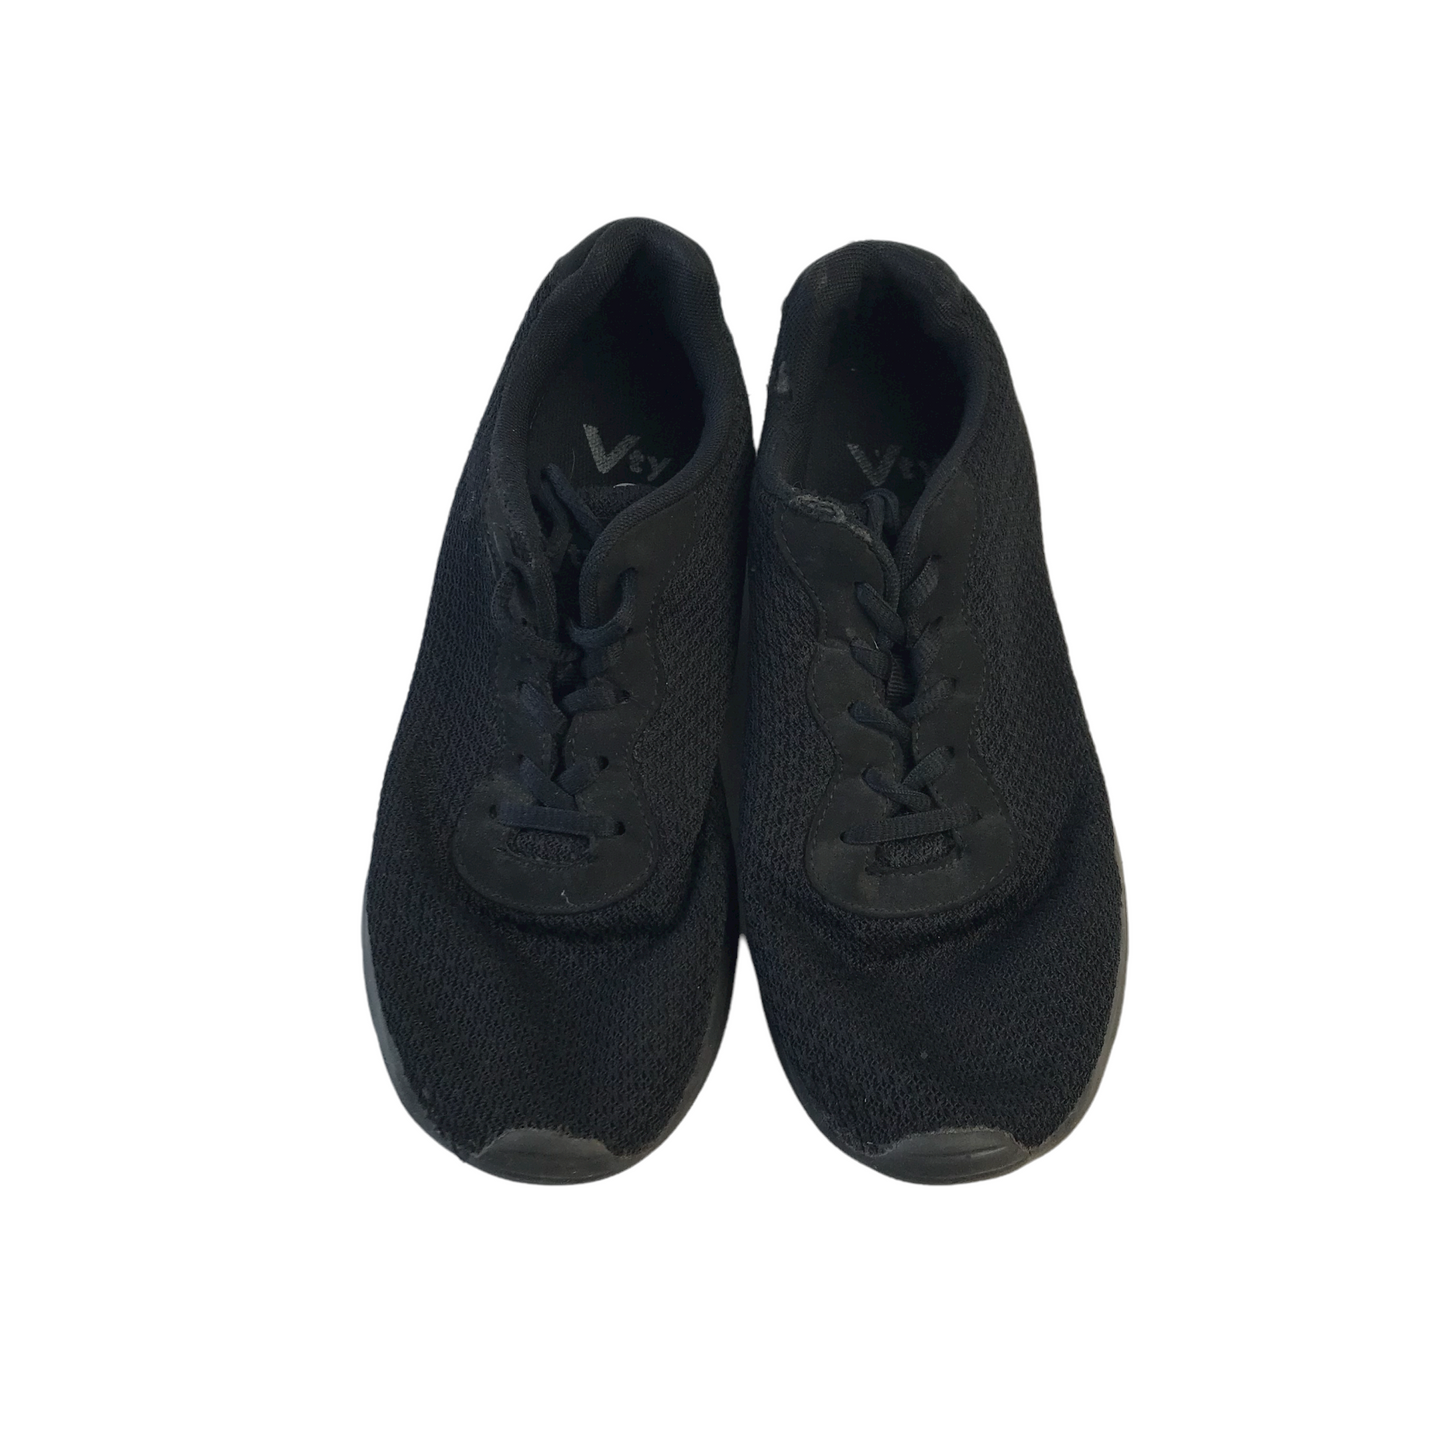 Vty Black Trainers Shoe Size 7